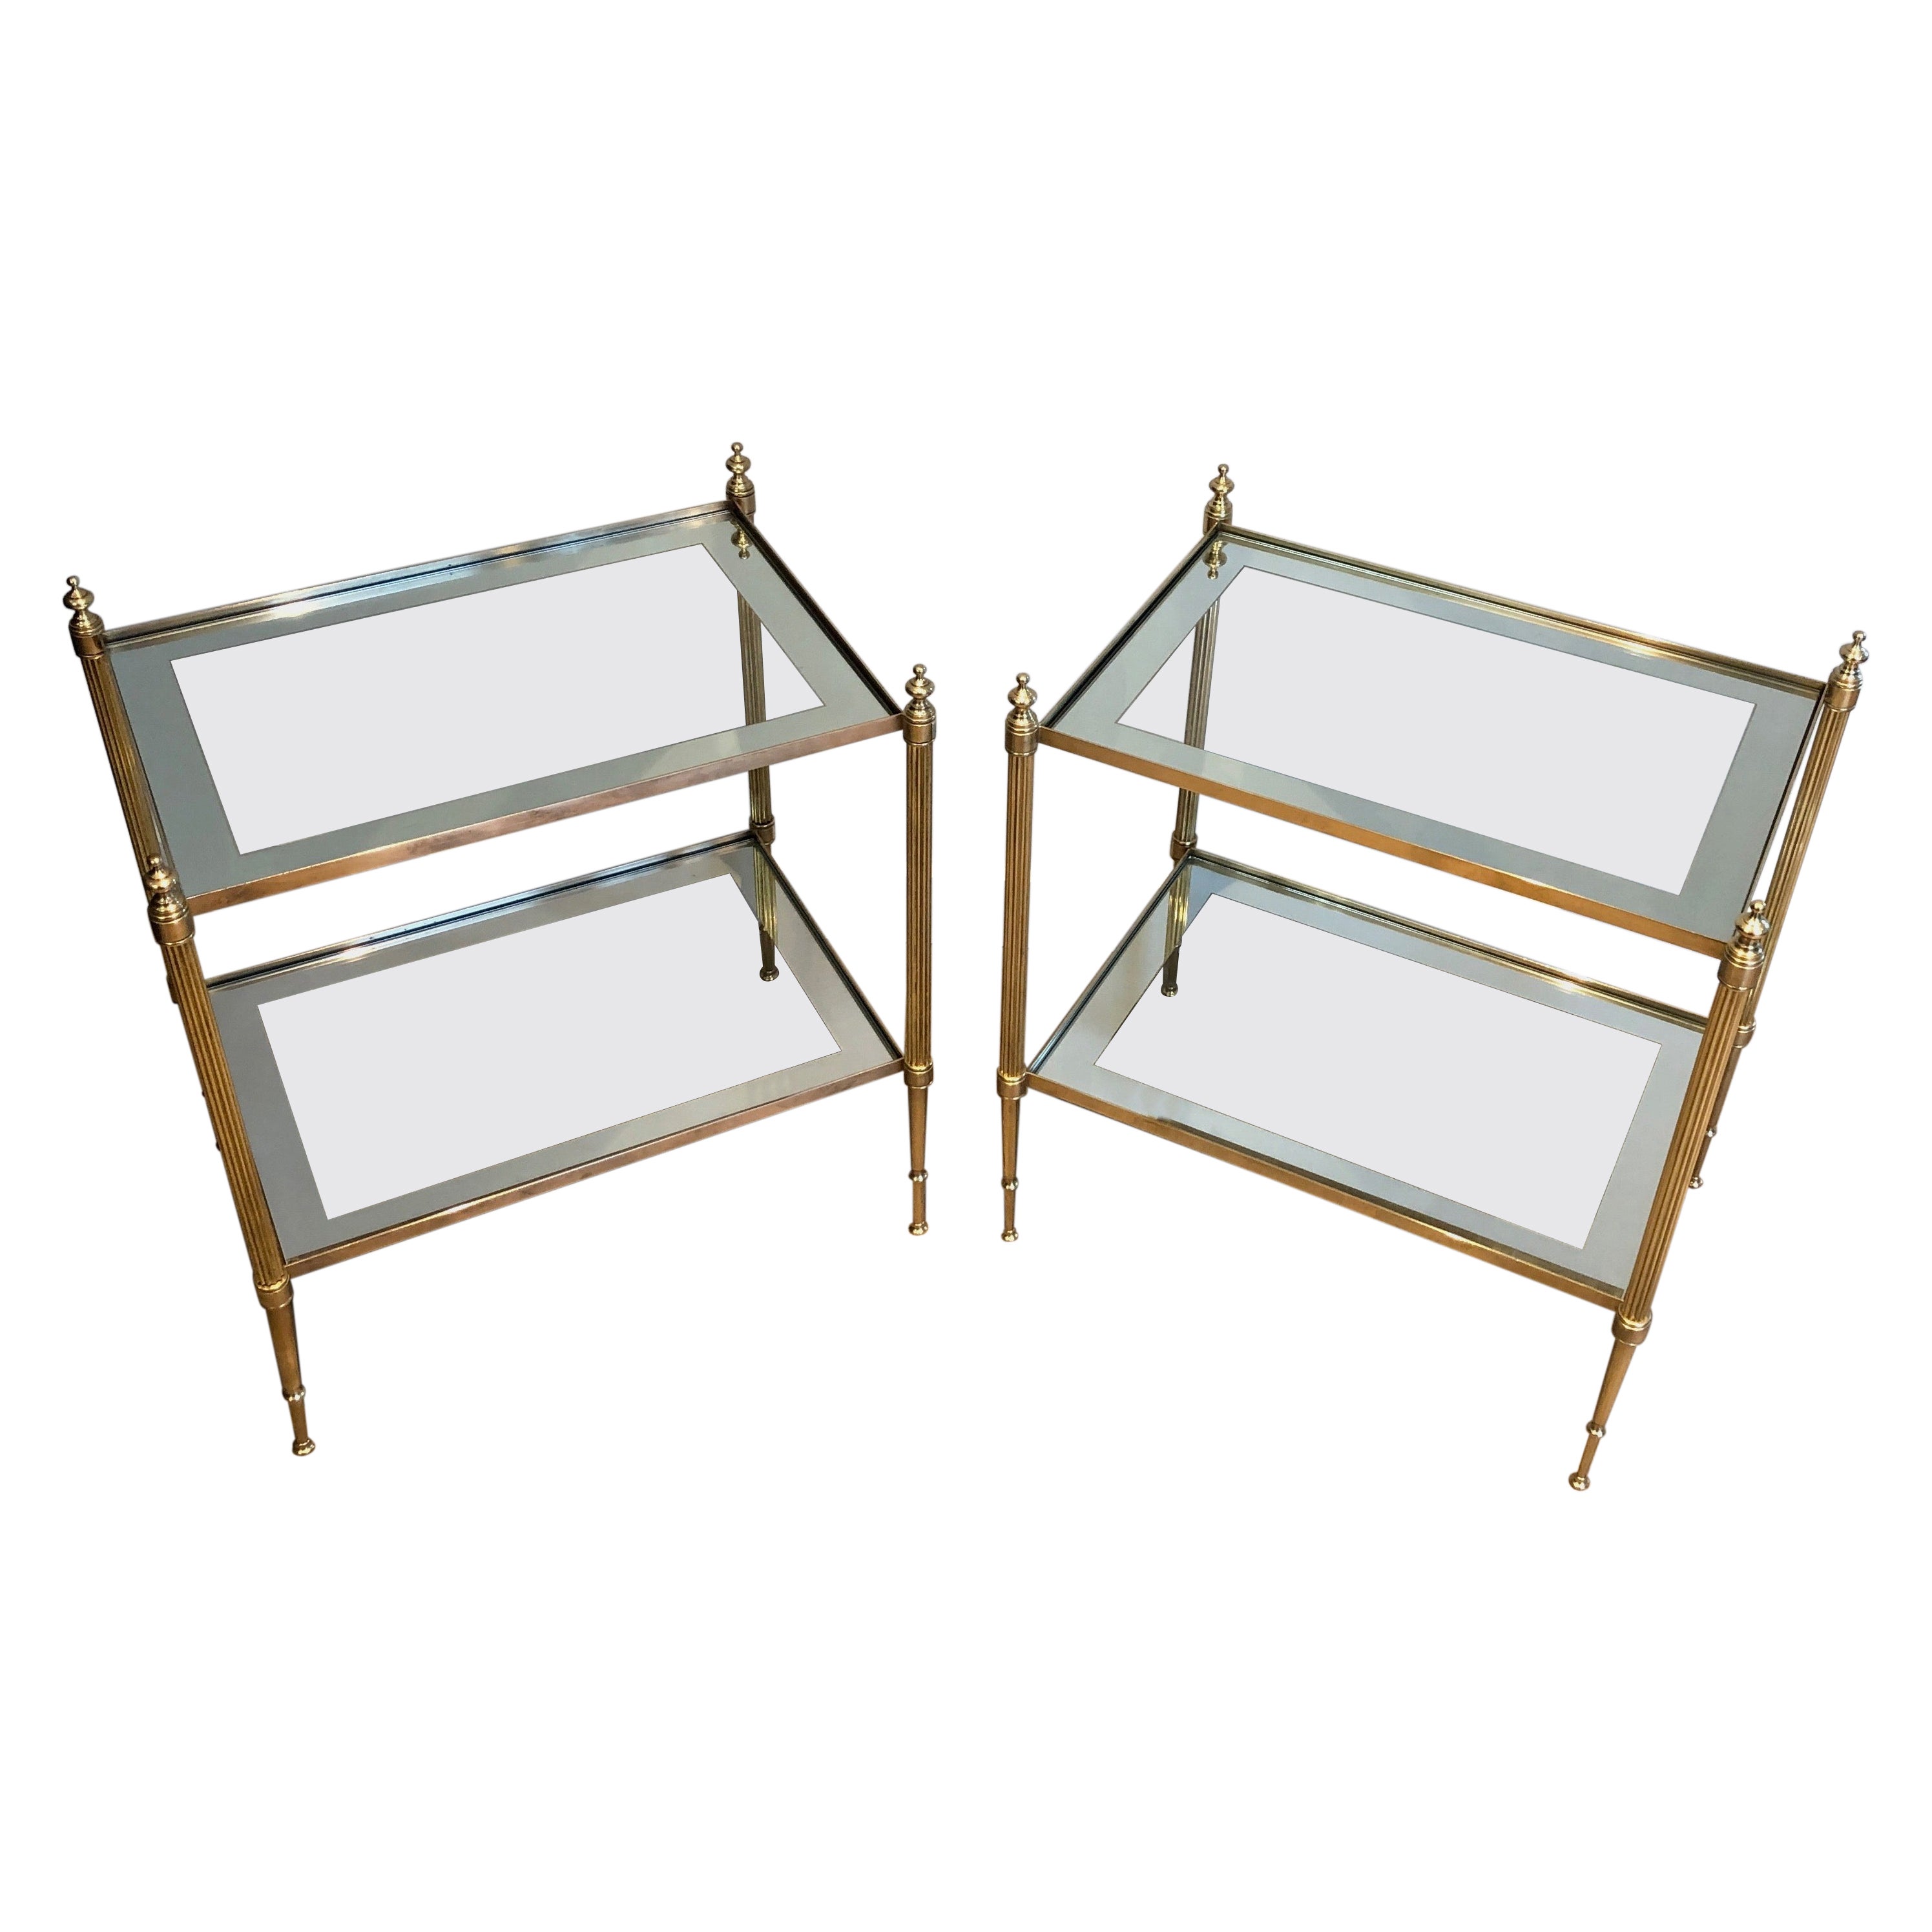 Pair of Neoclassical Style Brass Side Tables by Maison Jansen For Sale